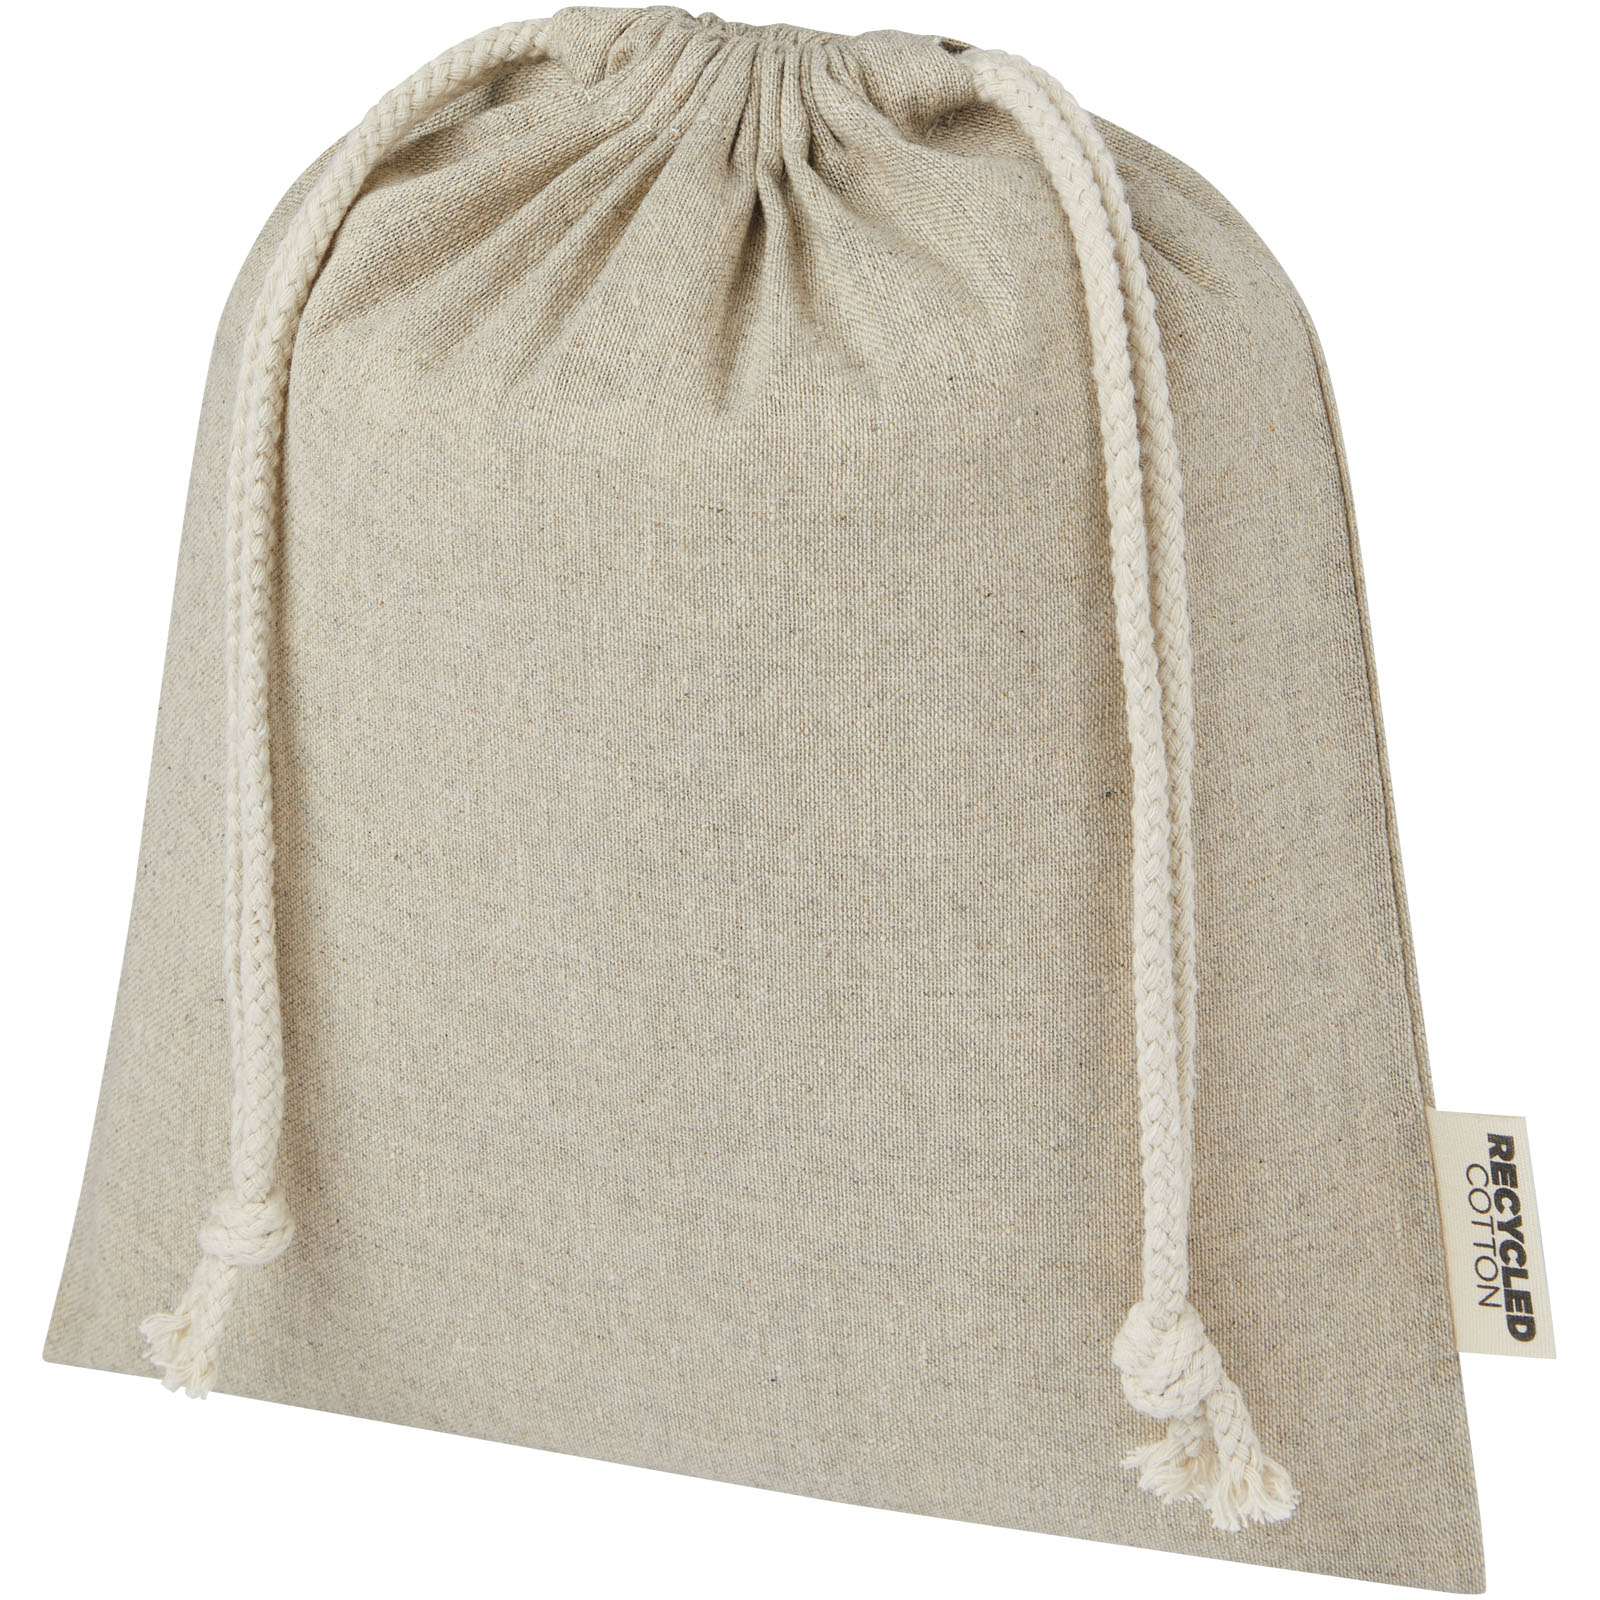 Cotton Bags - Pheebs 150 g/m² GRS recycled cotton gift bag medium 1.5L